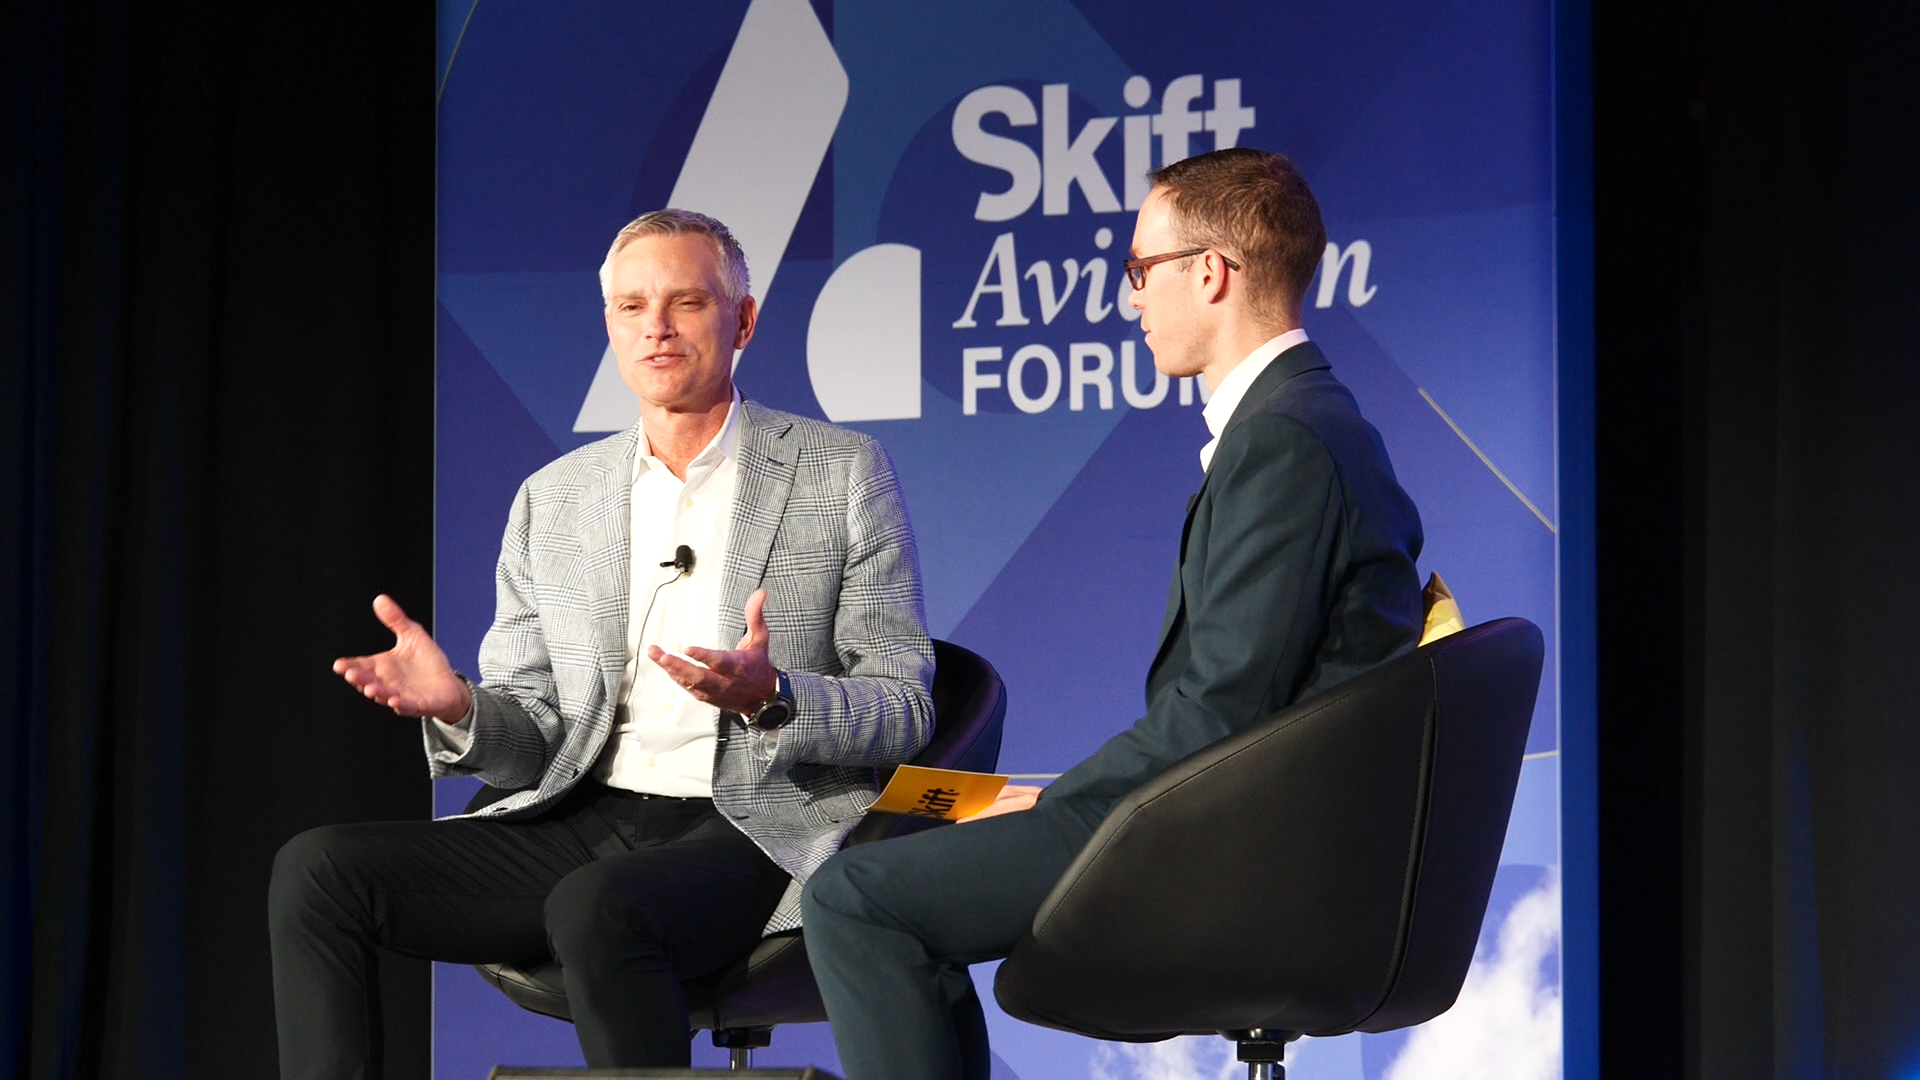 American Airlines CEO Robert Isom speaking on stage at Skift Aviation Forum in Dallas, Texas, November 2022.